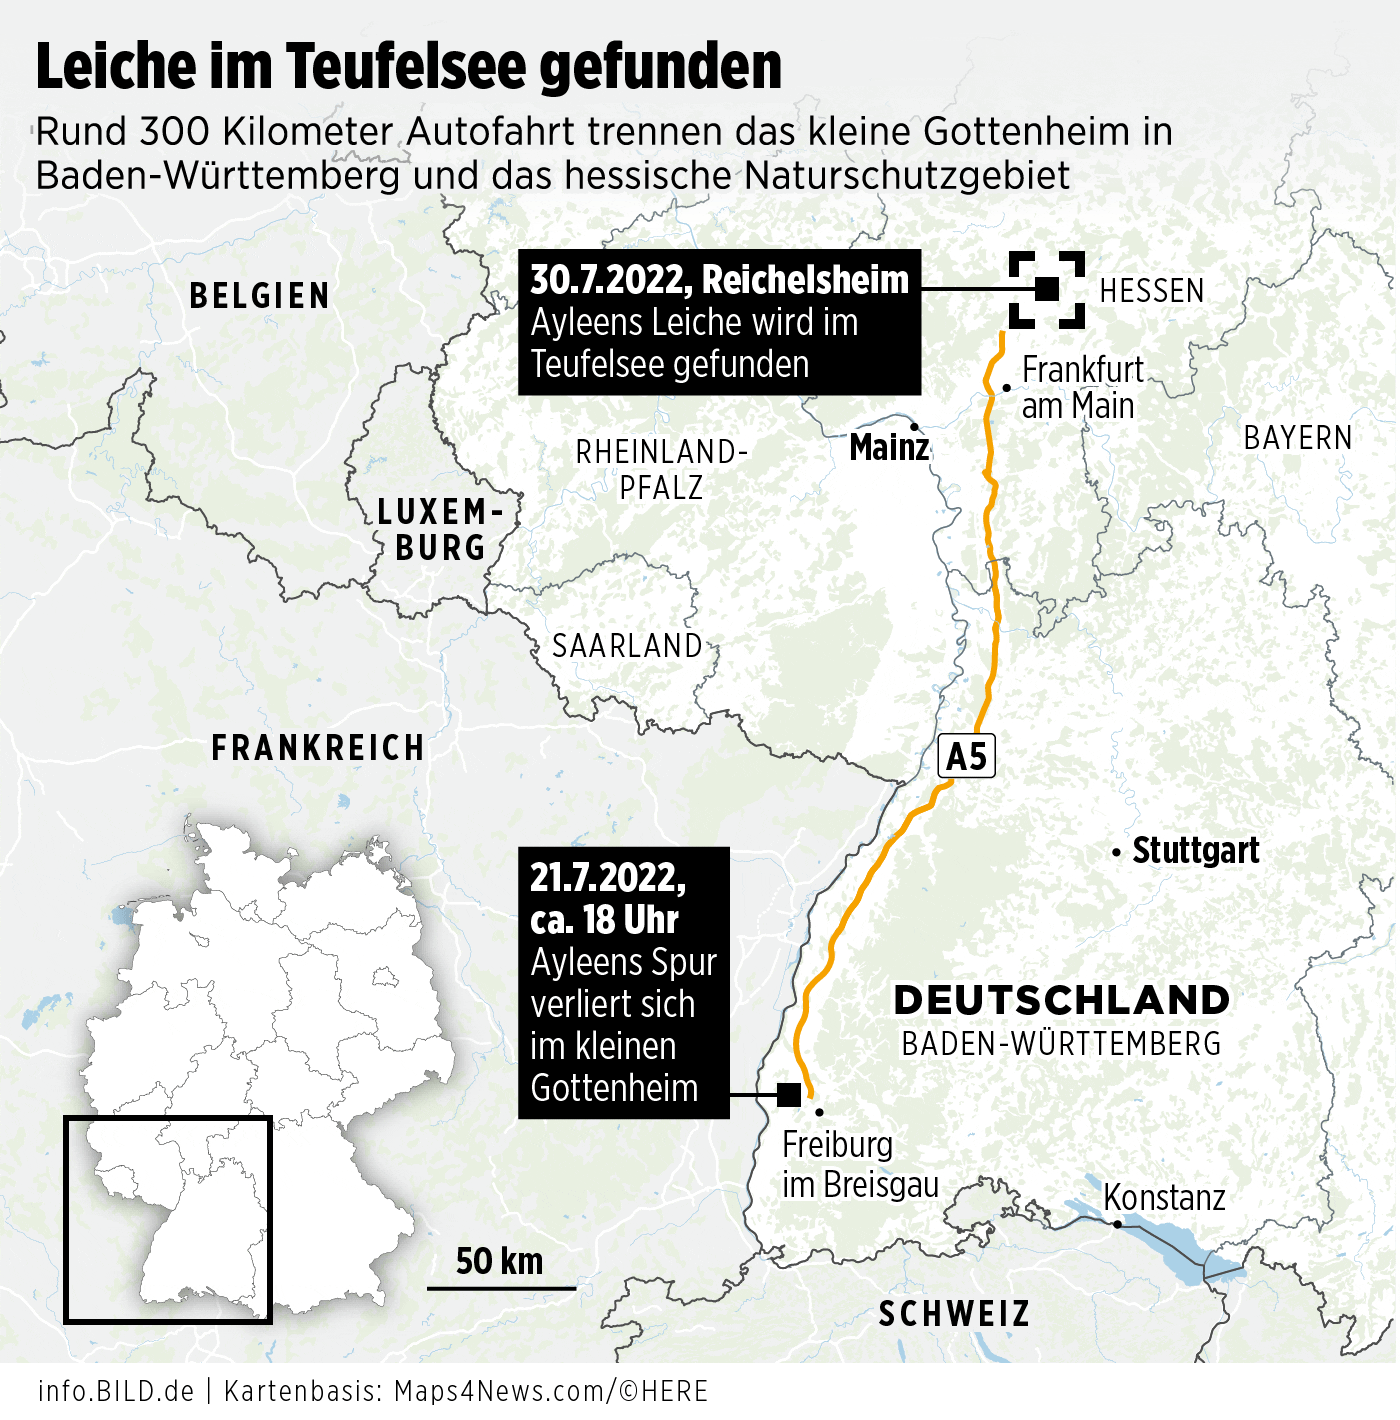 Map: Eileen's body found in Teufelsee - graphic